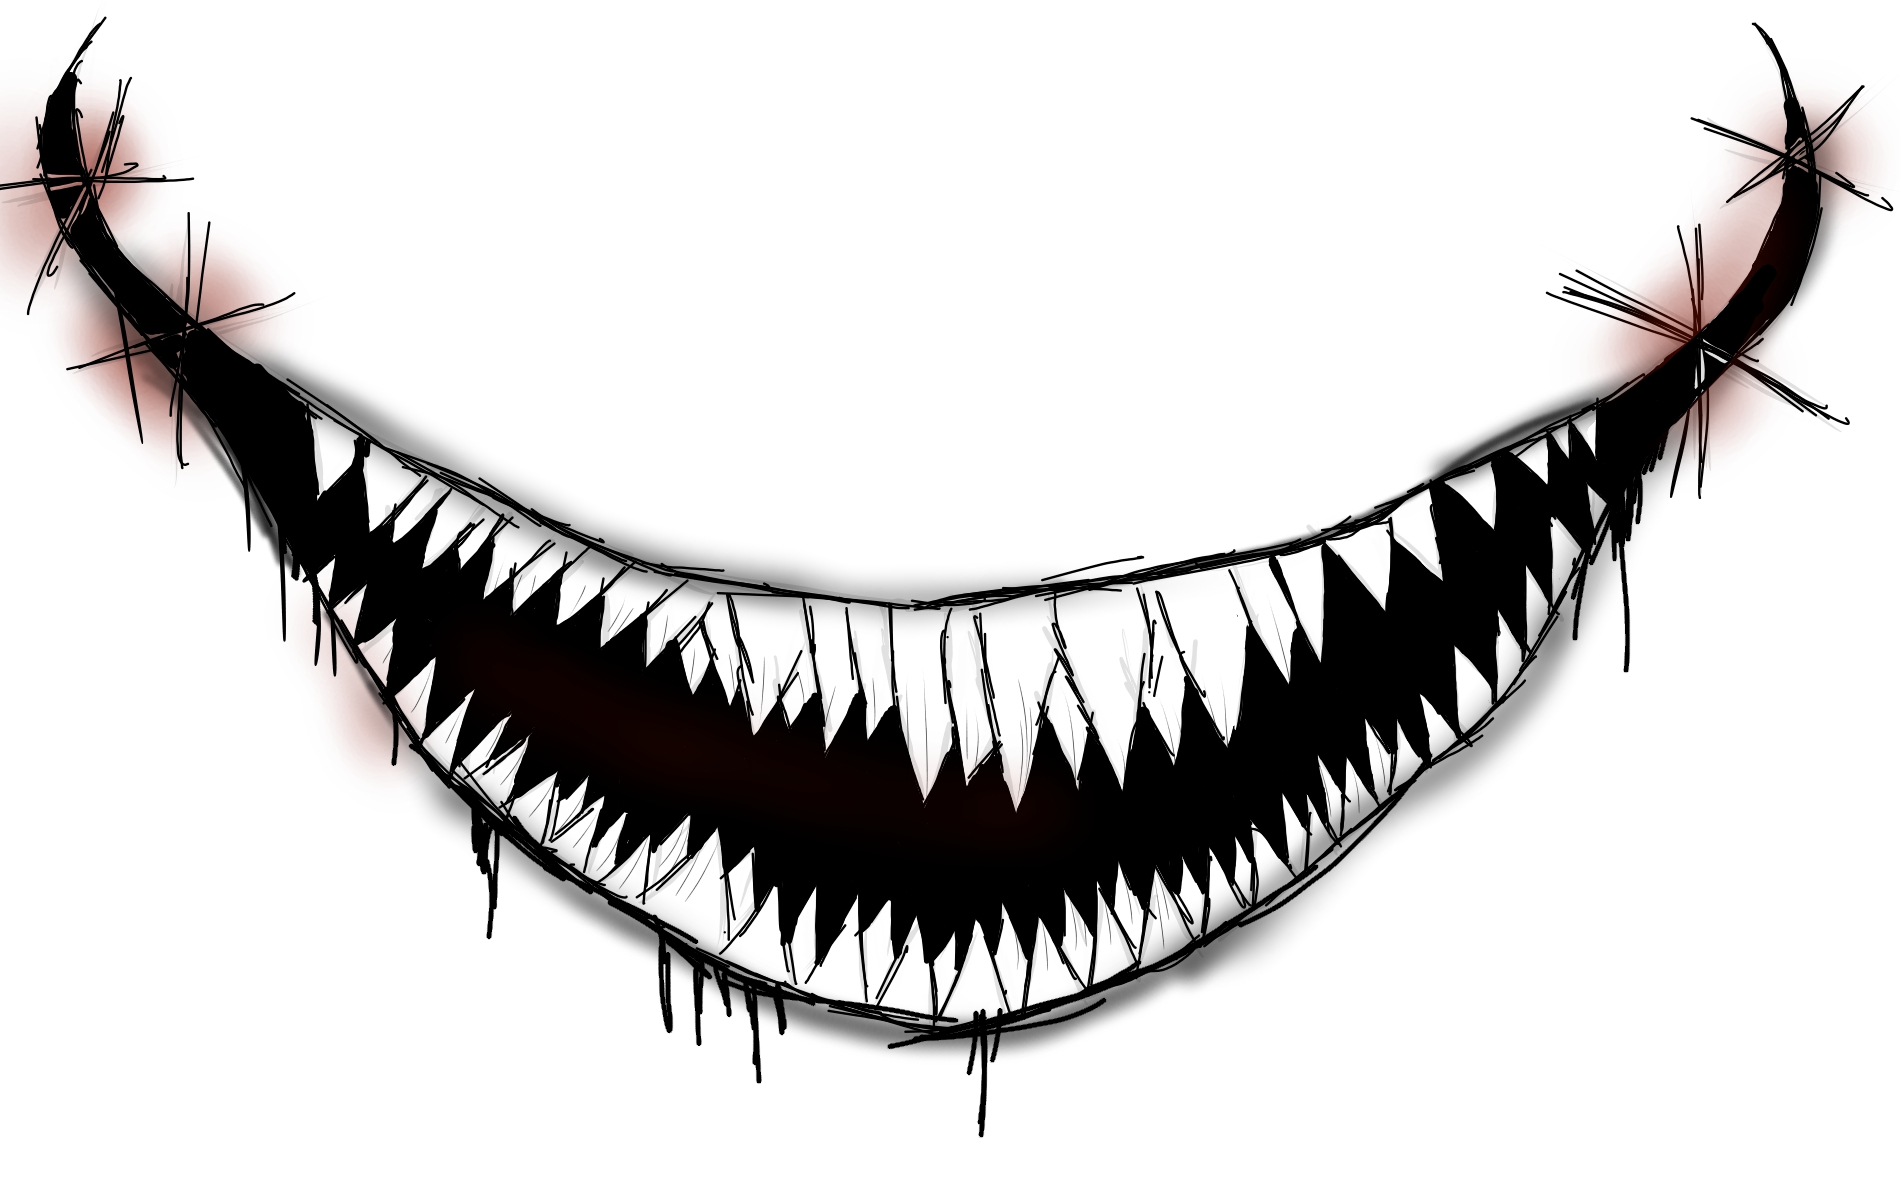 smiley mouth by ExeScout on DeviantArt